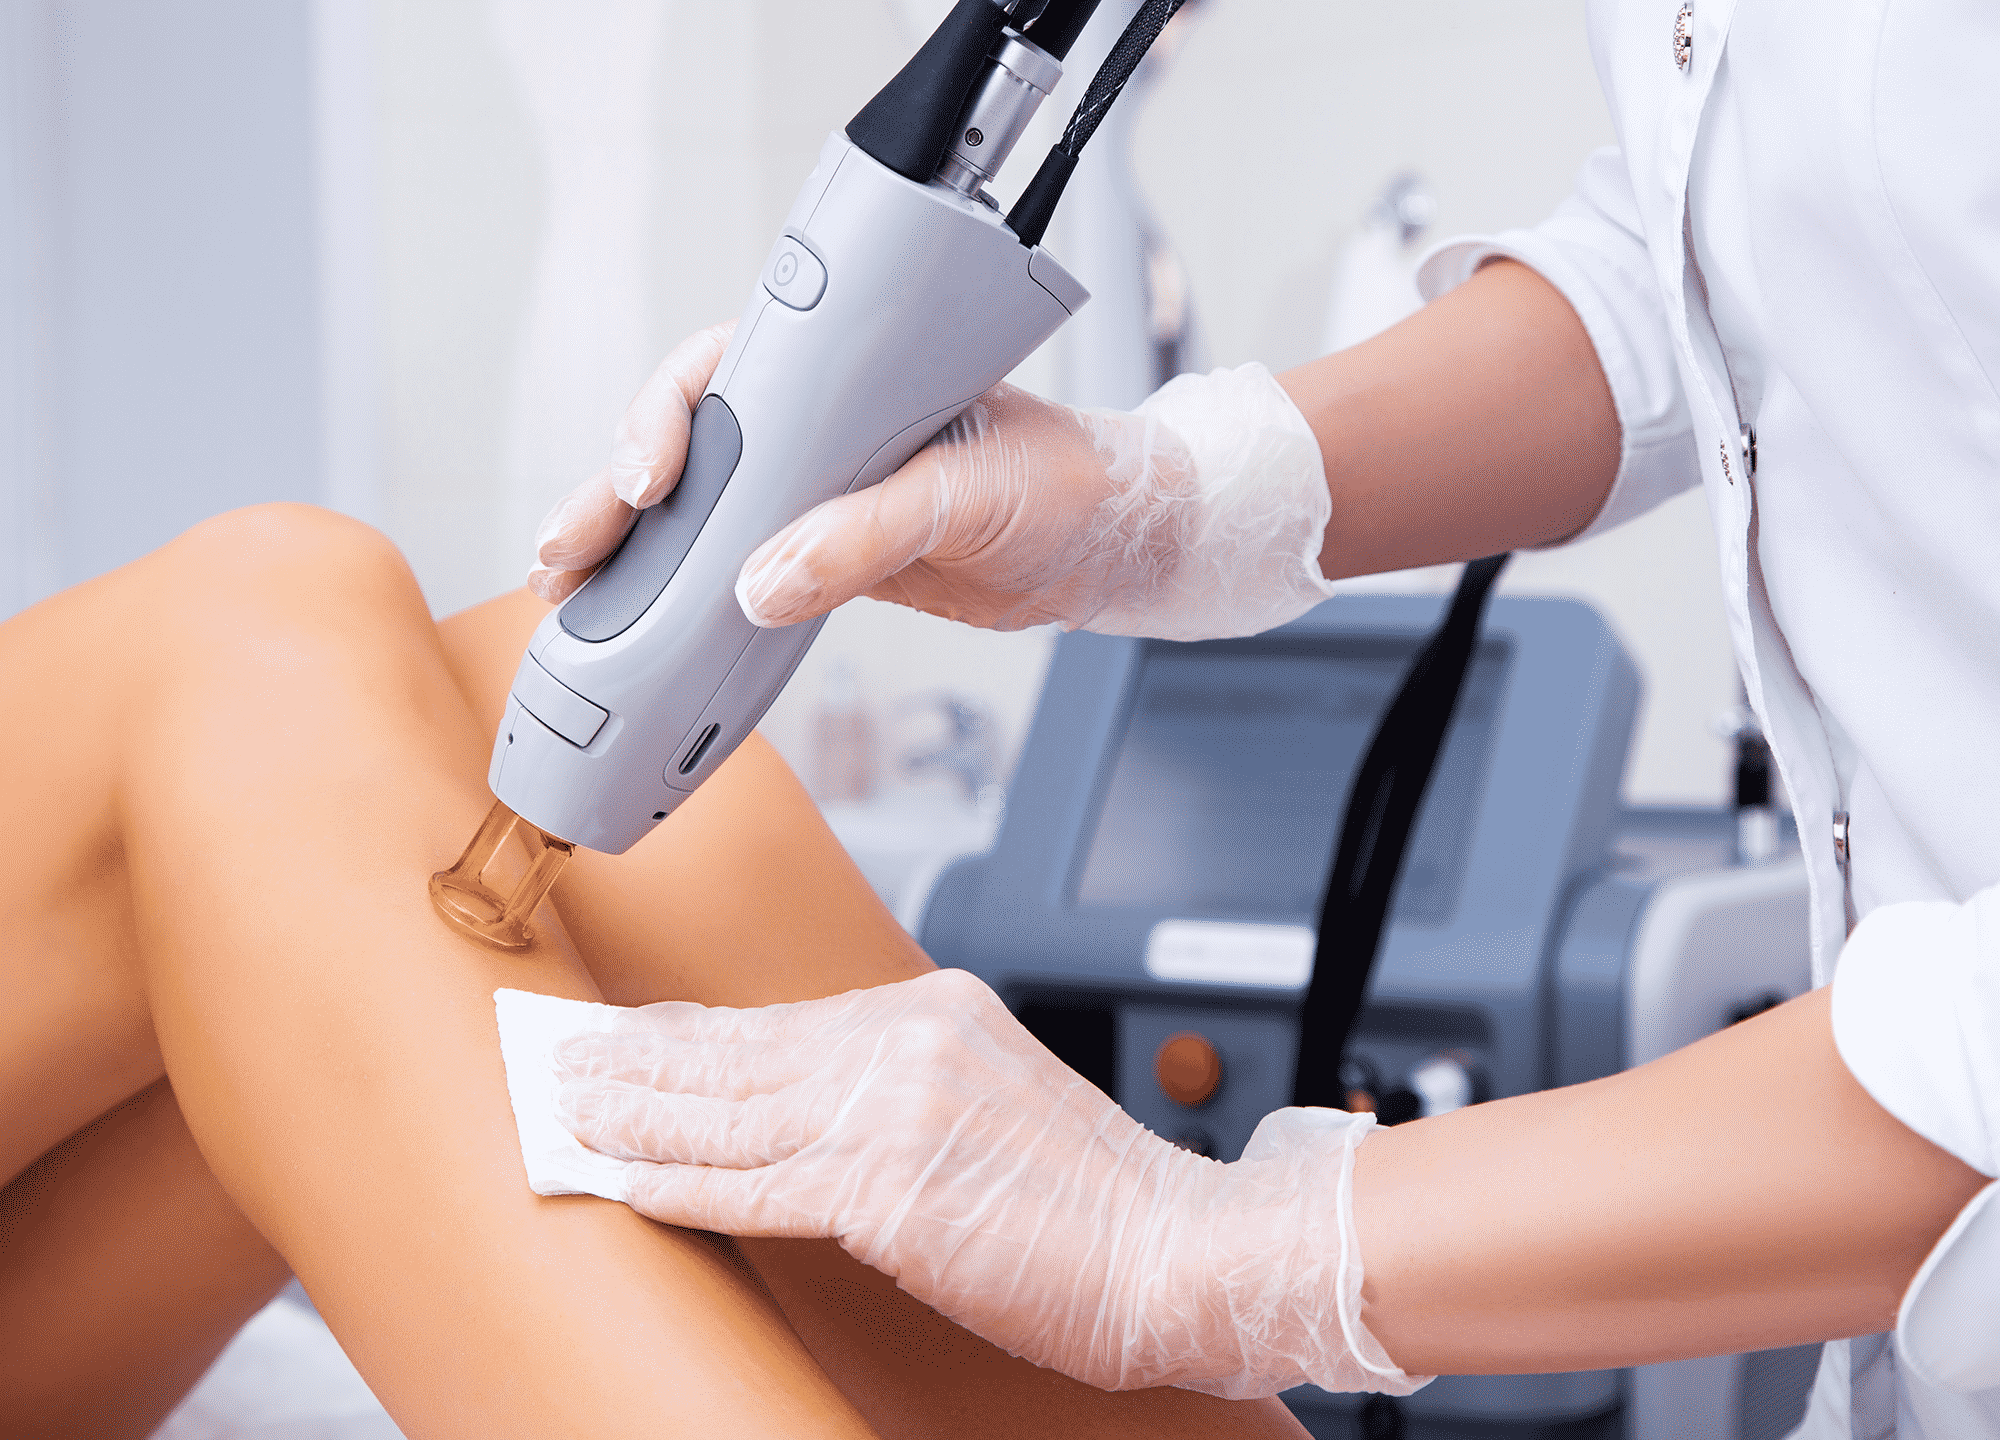 How Laser Hair Removal Left One Woman Scarred | RealSelf News